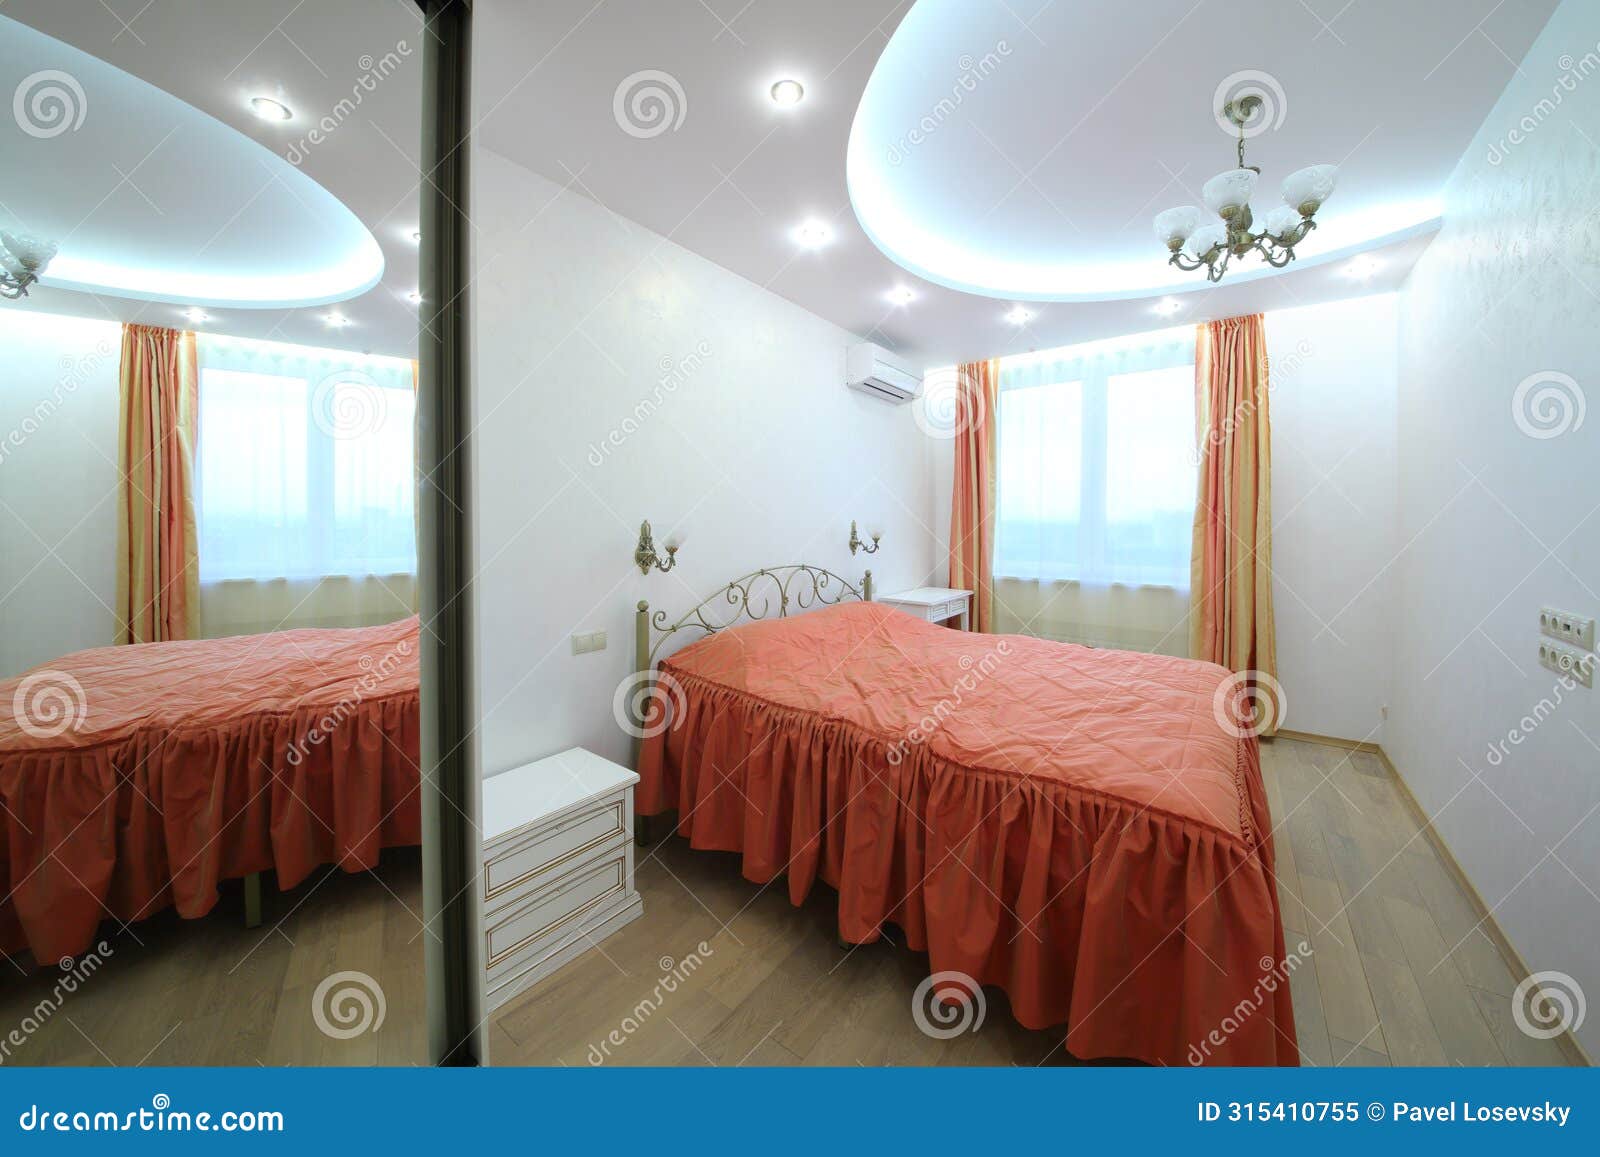 interior modern bedroom with double bed, bedside